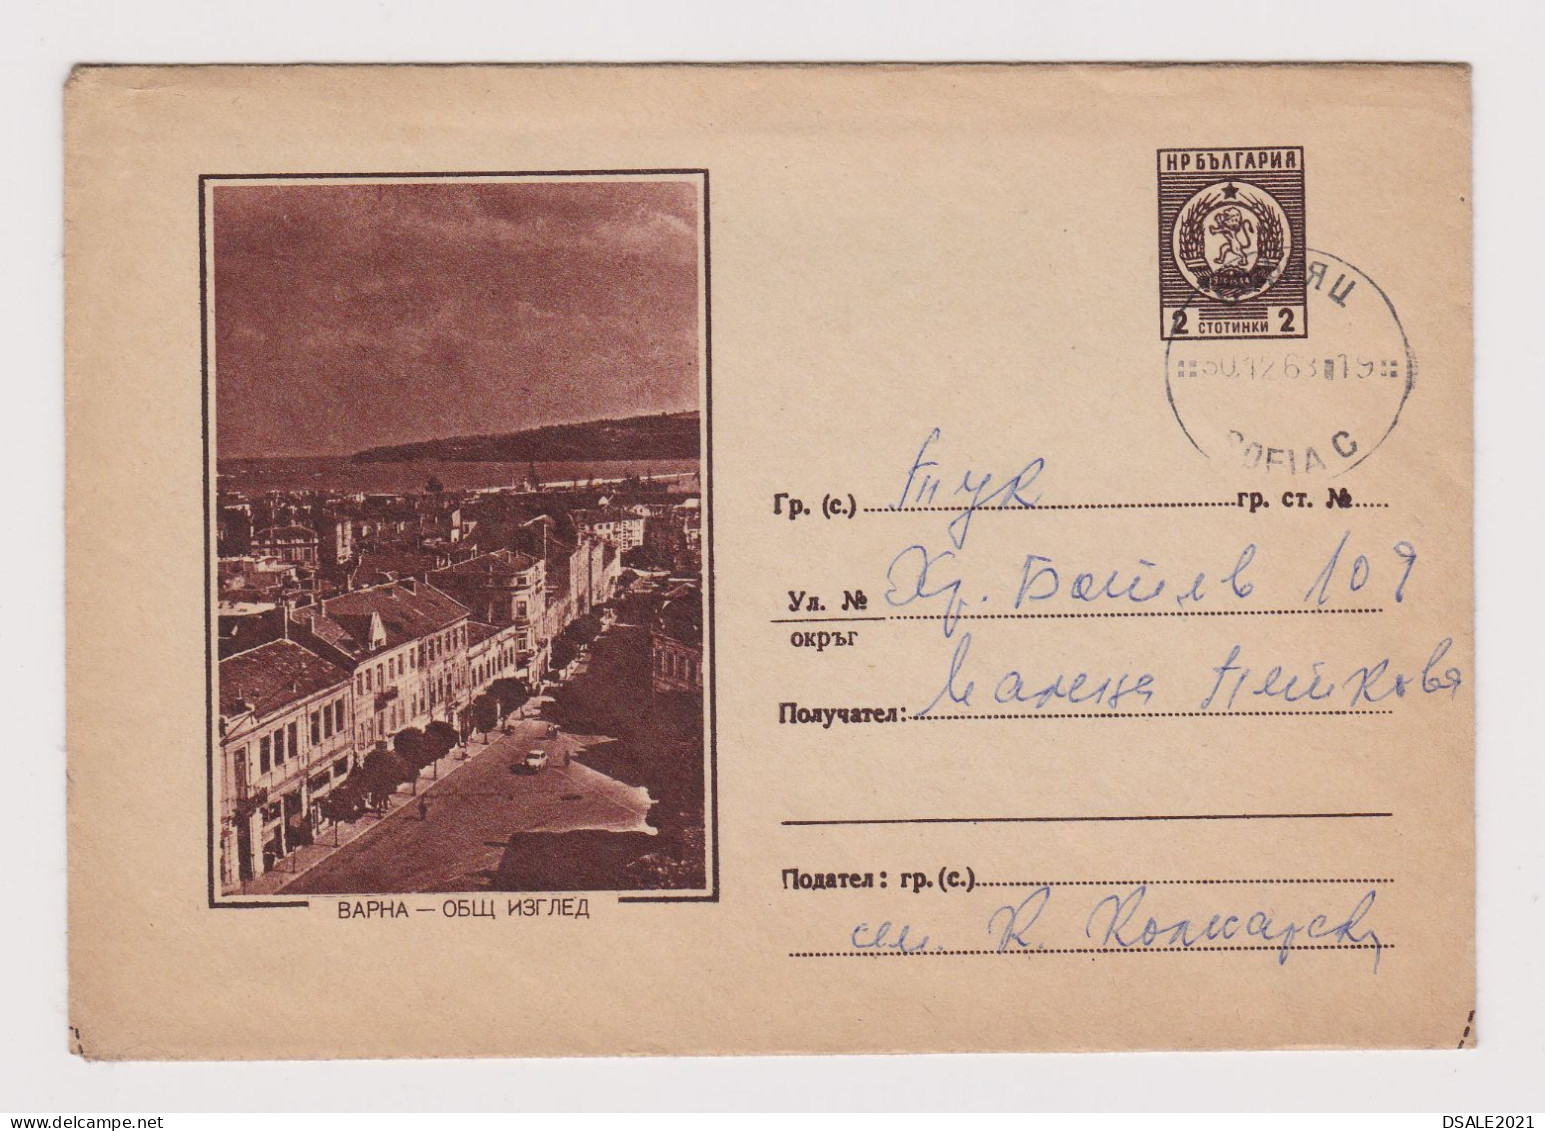 Bulgaria Bulgarie Bulgarien 1962 Postal Stationery Cover PSE, Entier, Ganzsachen, Topic City VARNA-Downtown (68212) - Briefe